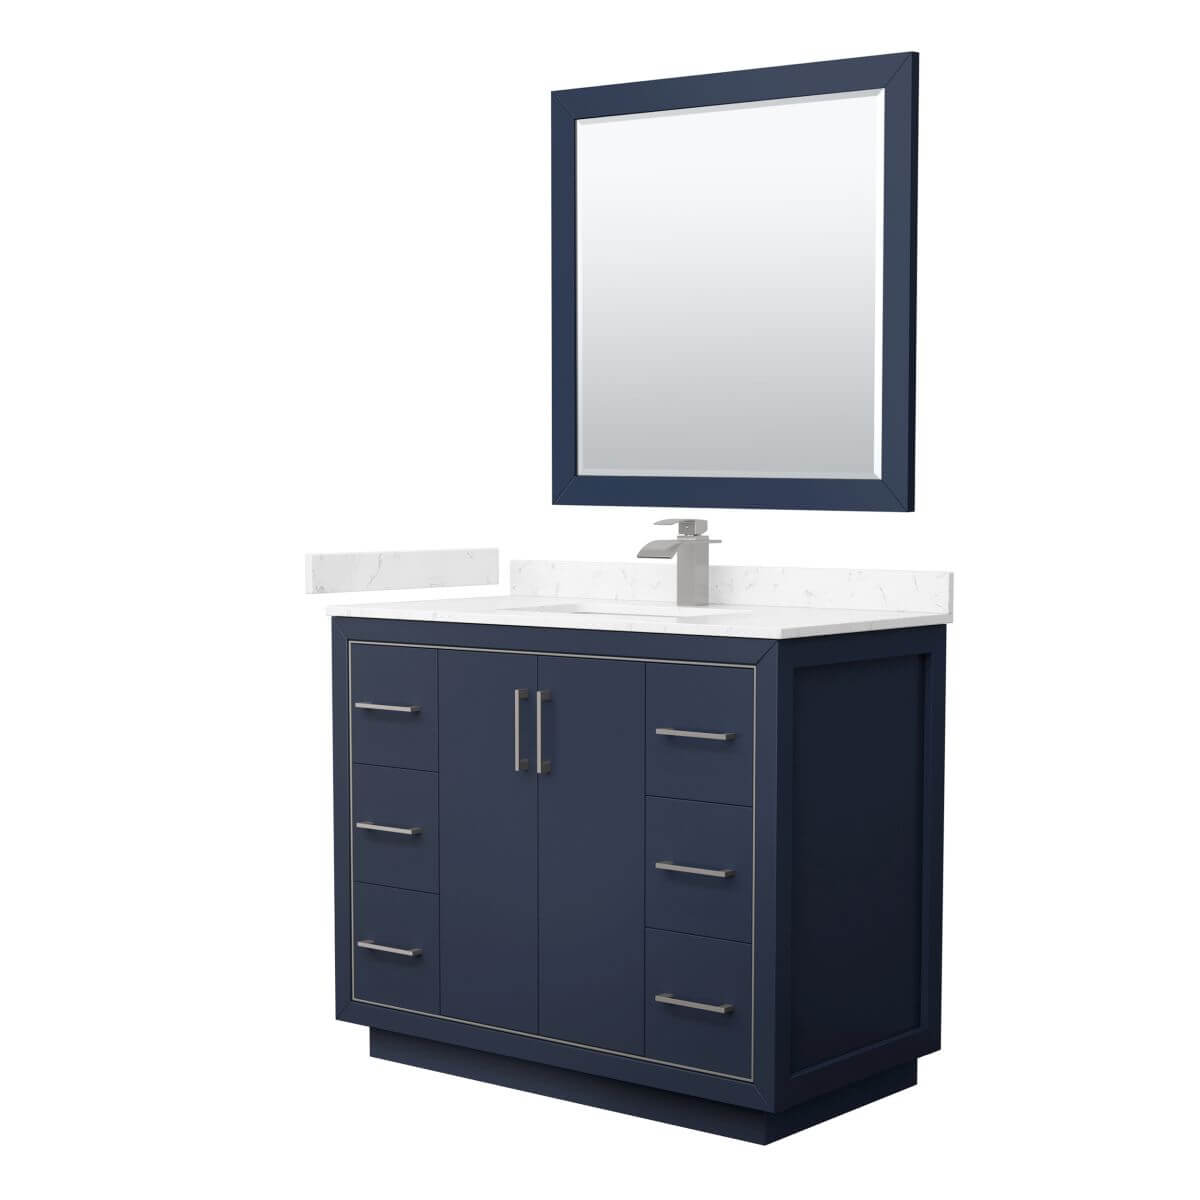 Wyndham Collection WCF111142SBNC2UNSM34 Icon 42 inch Single Bathroom Vanity in Dark Blue with Carrara Cultured Marble Countertop, Undermount Square Sink, Brushed Nickel Trim and 34 Inch Mirror